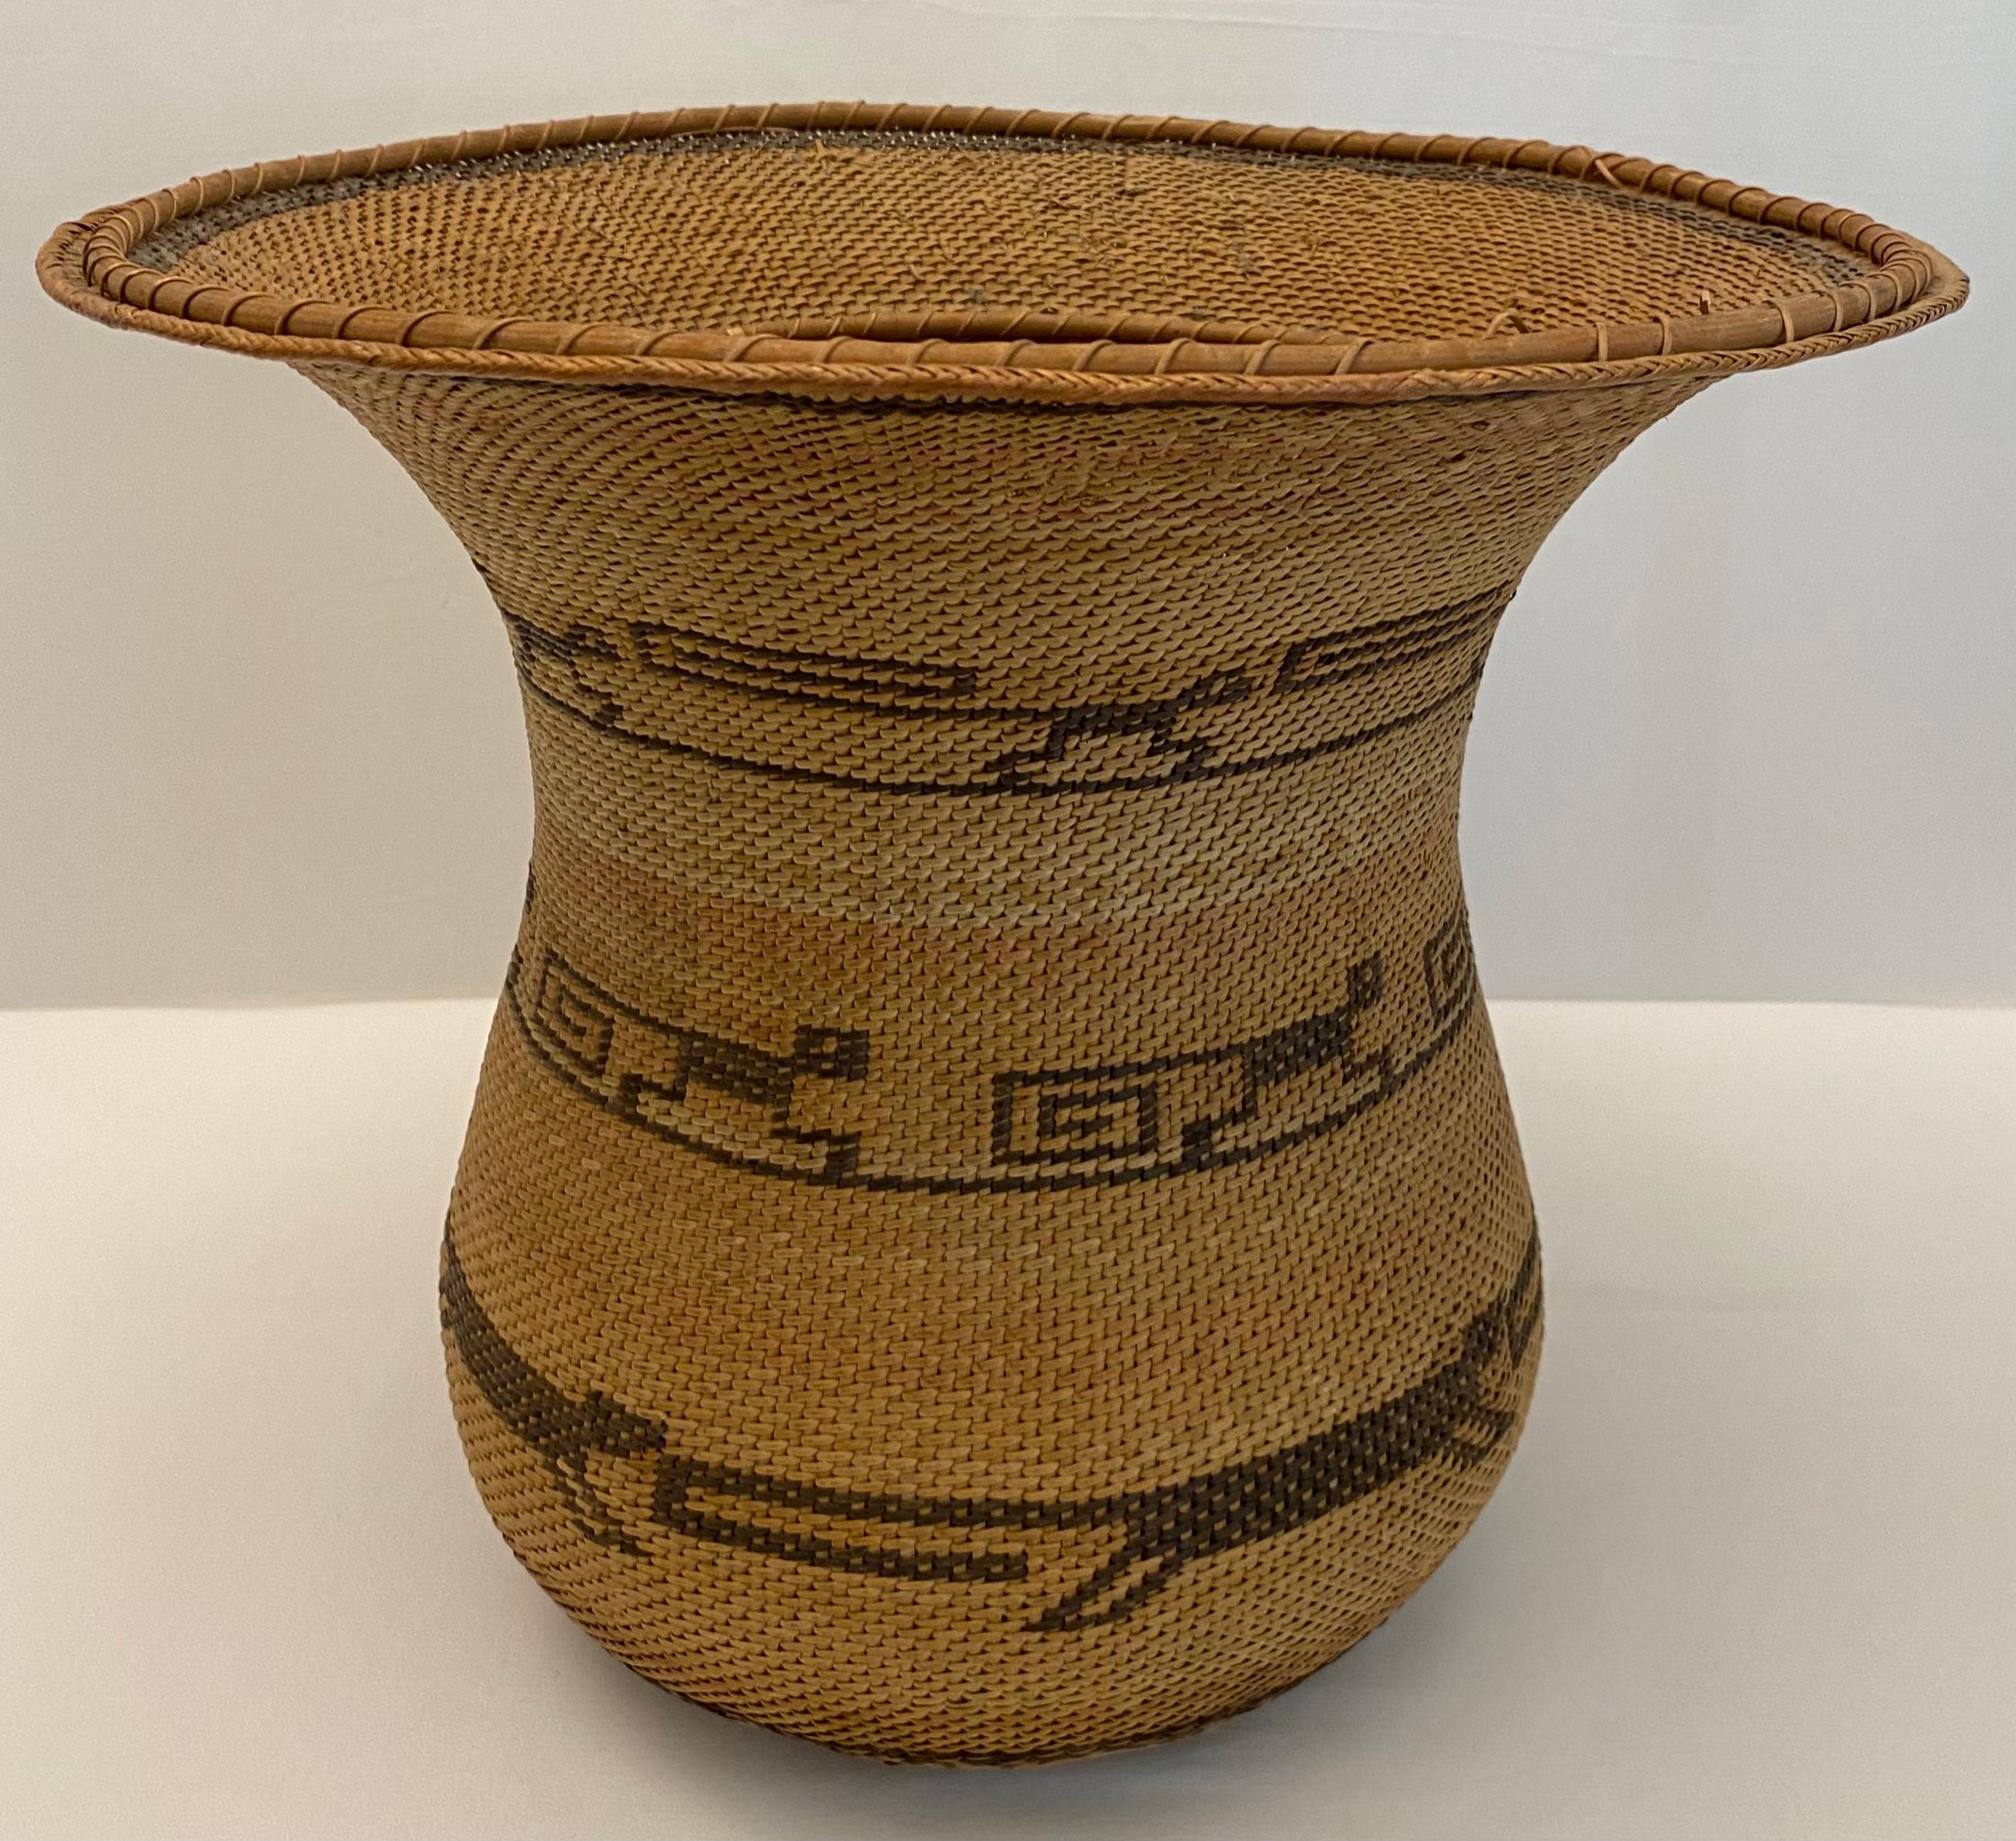 Venezuelan Hand Woven Basket by the Tribal People of the Amazon 